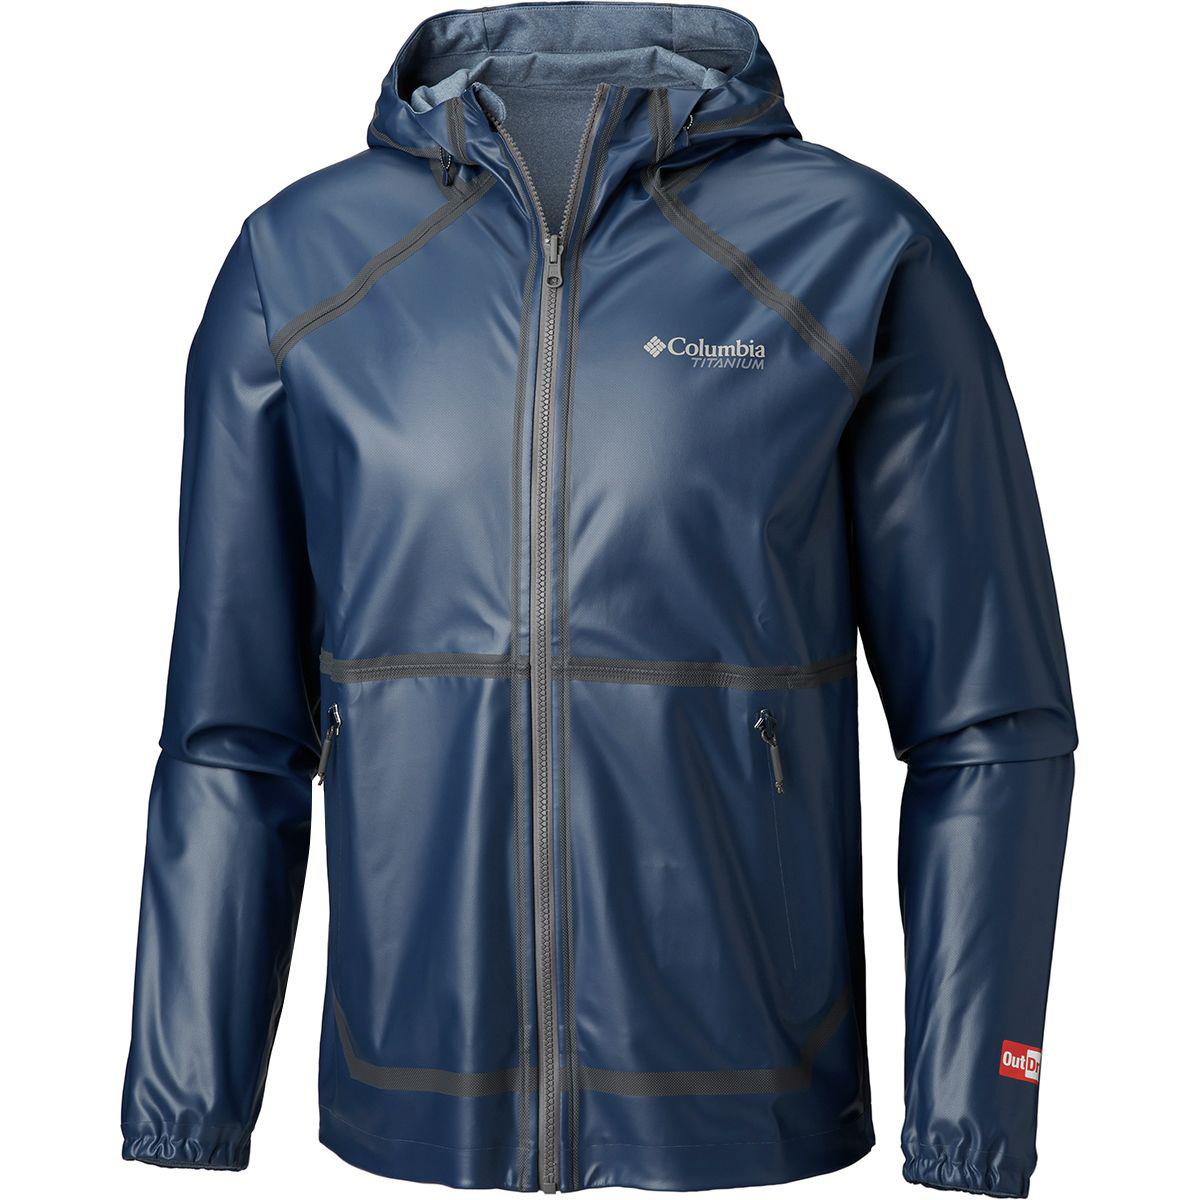 Columbia Synthetic Outdry Ex Reversible Jacket in Carbon (Blue) for Men